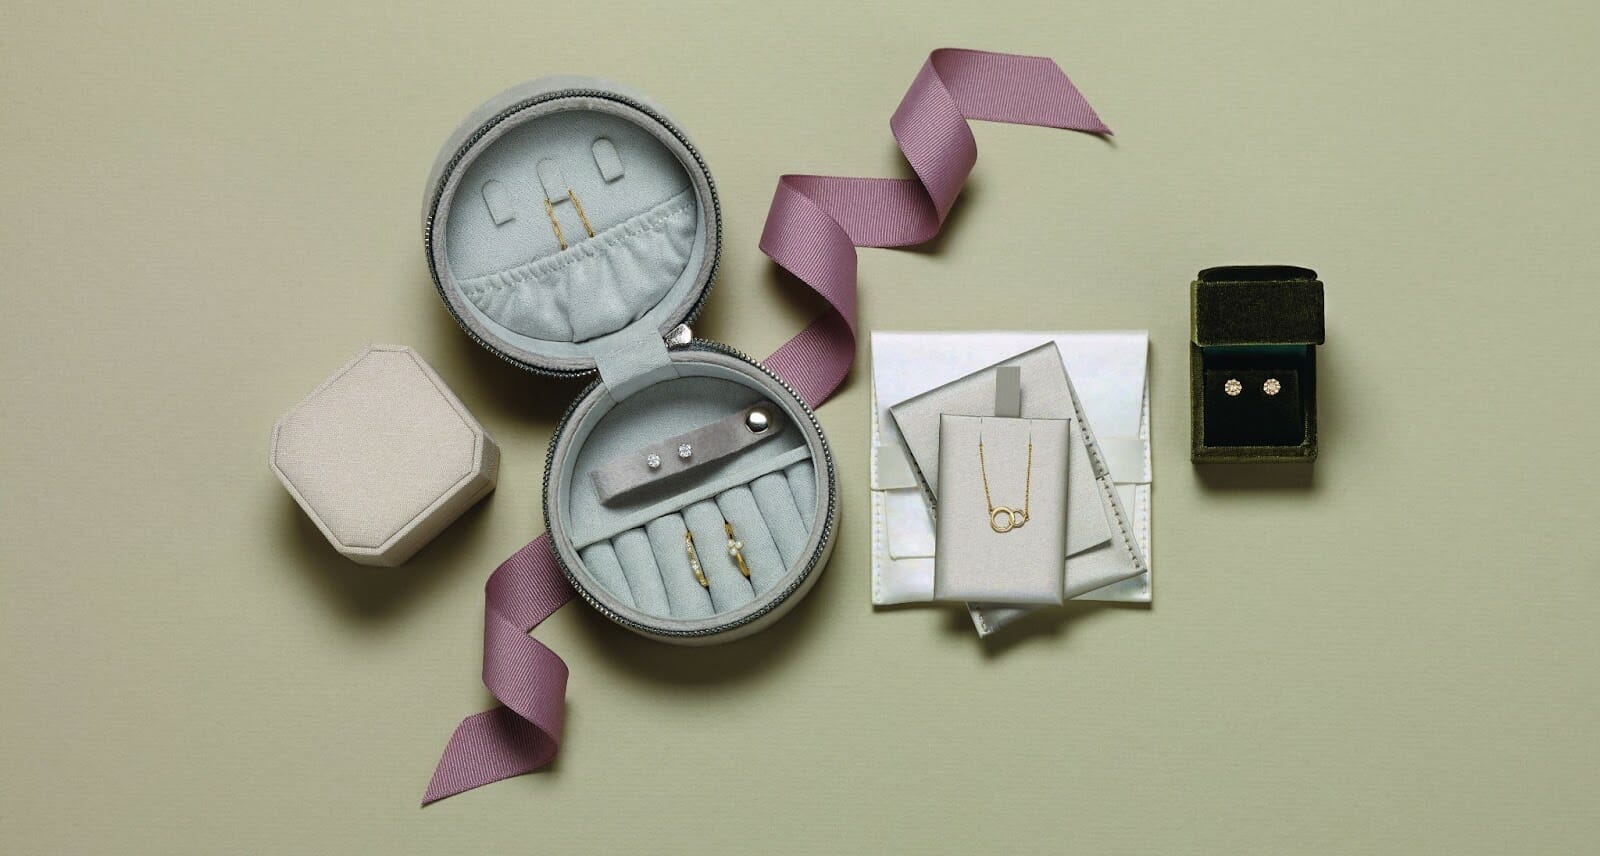 Several pieces of jewellery organised into a carrying case made for travelling with jewellery.